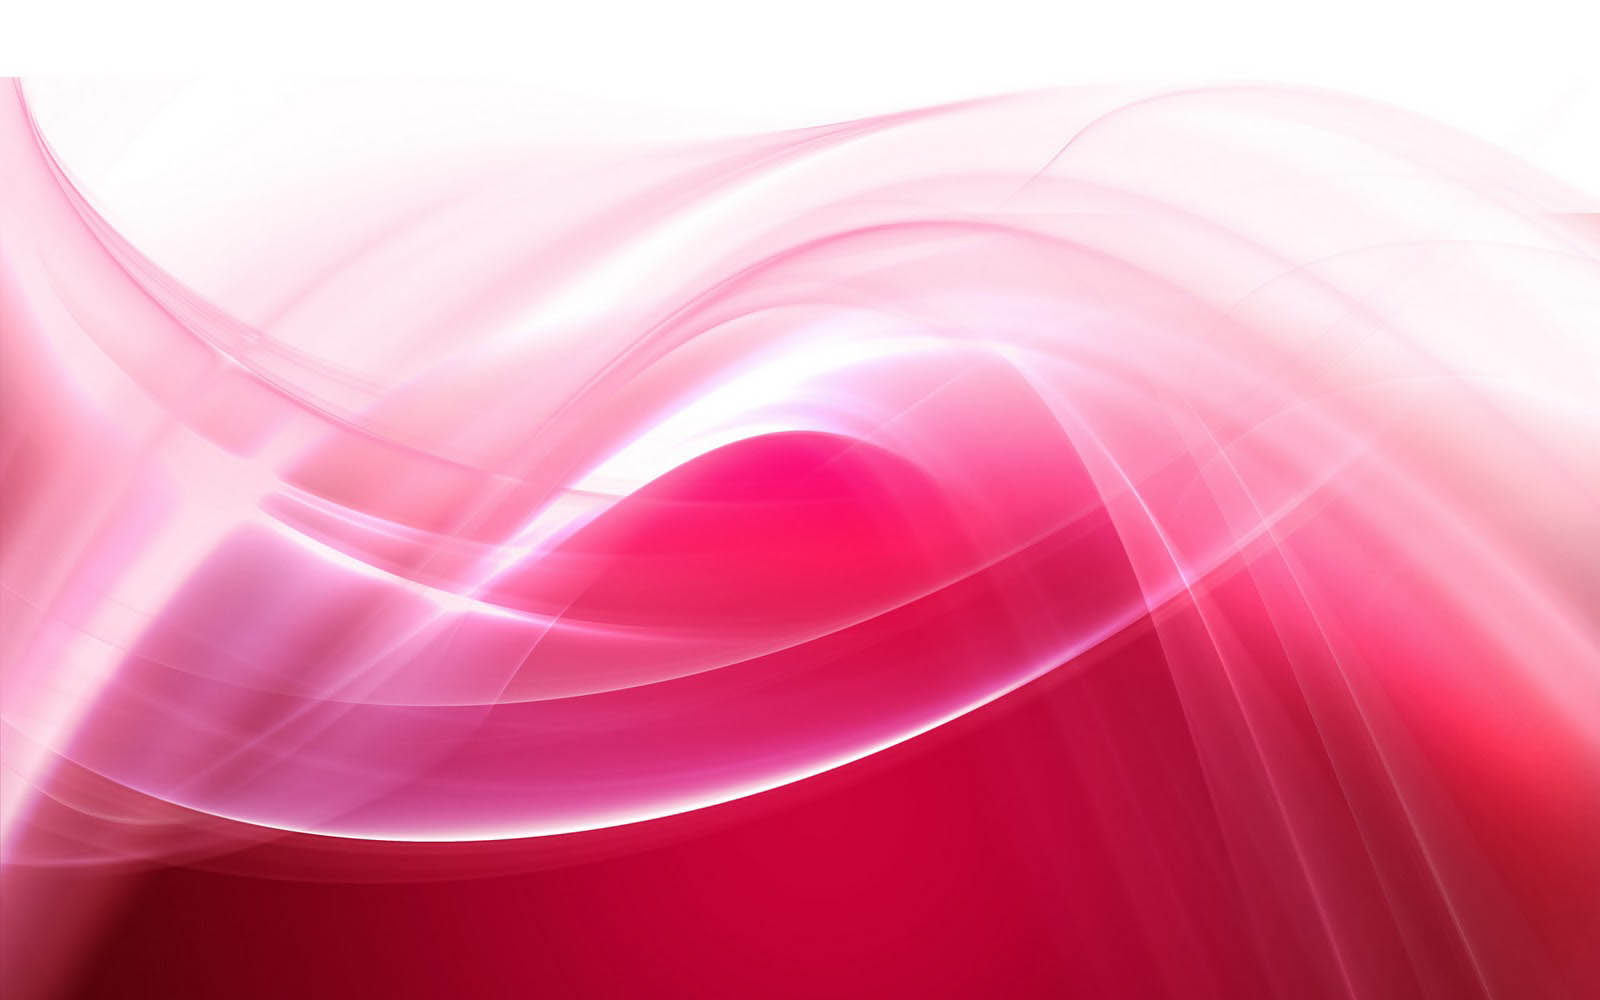 Gallery Mangklex HOT 2013 Popular Abstract Pink Wallpapers 1600x1000